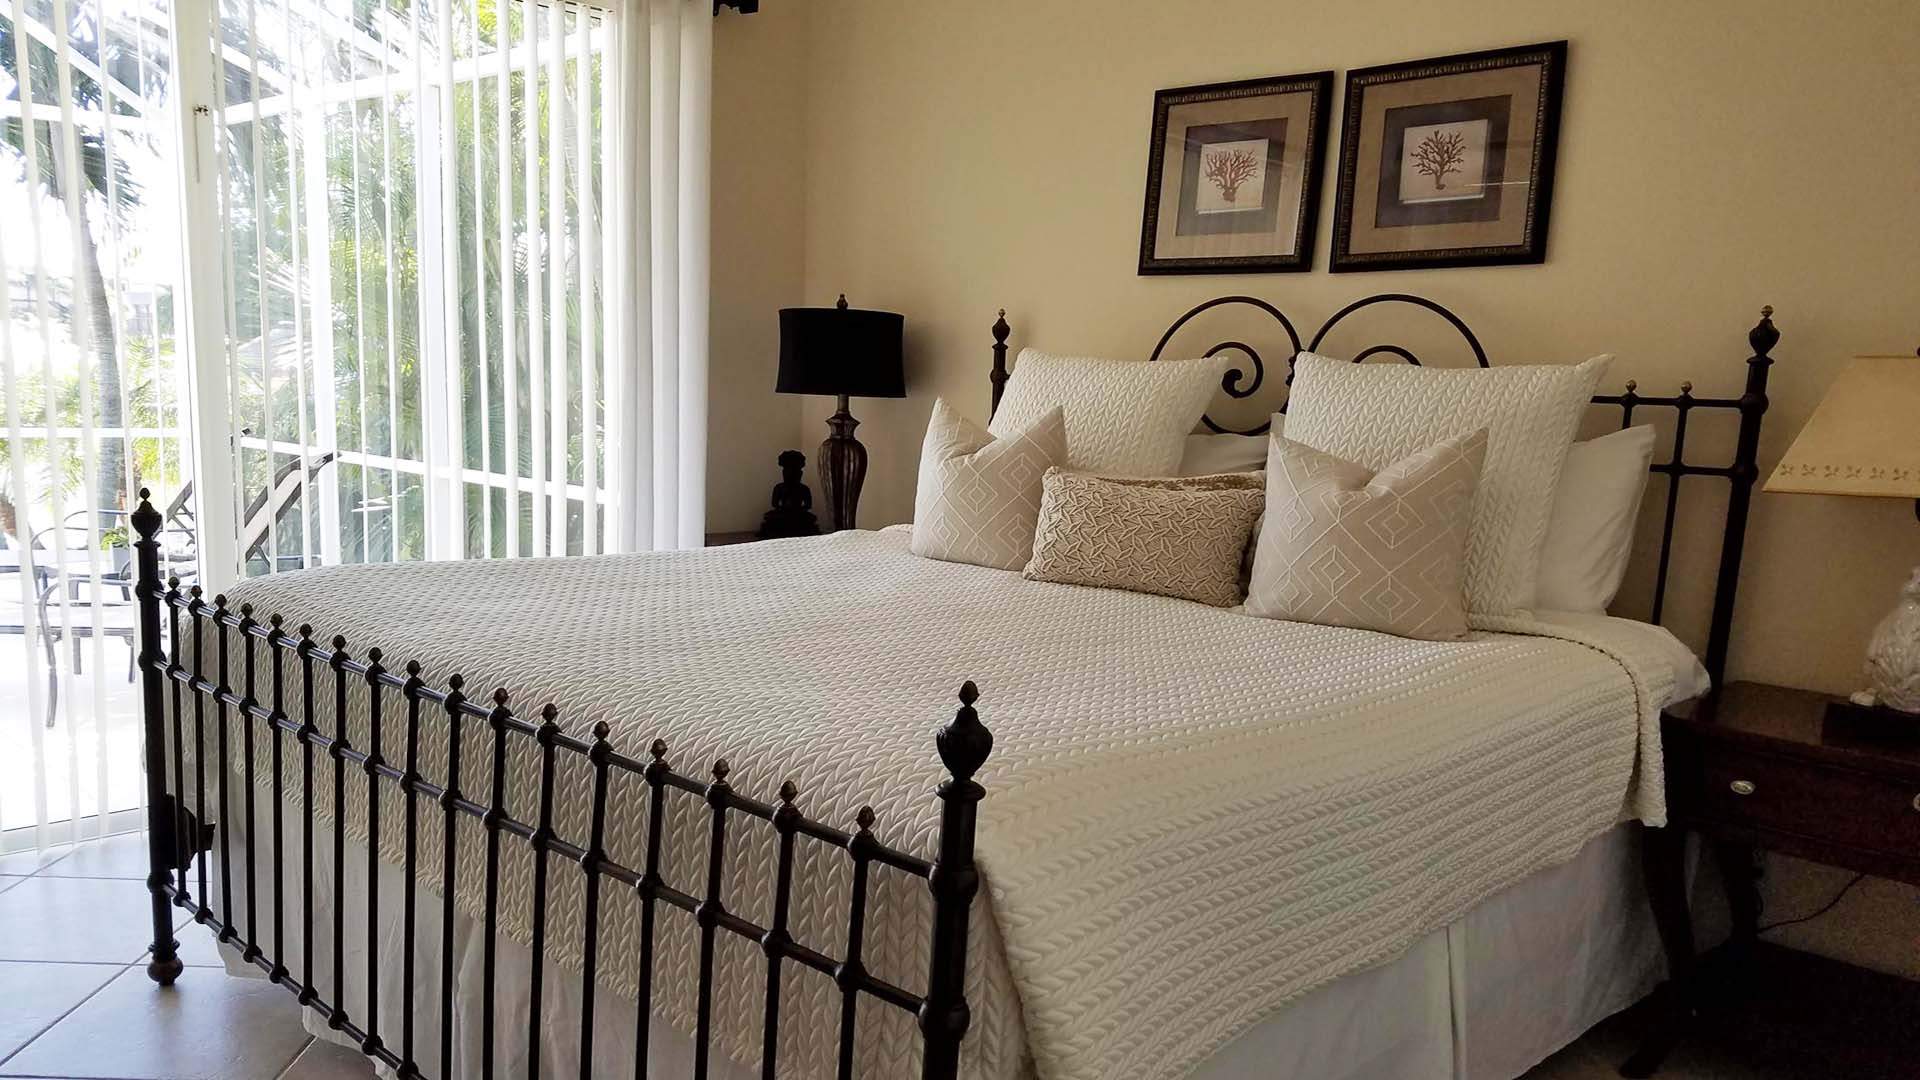 The second bedroom features another King size bed and leads out to the patio